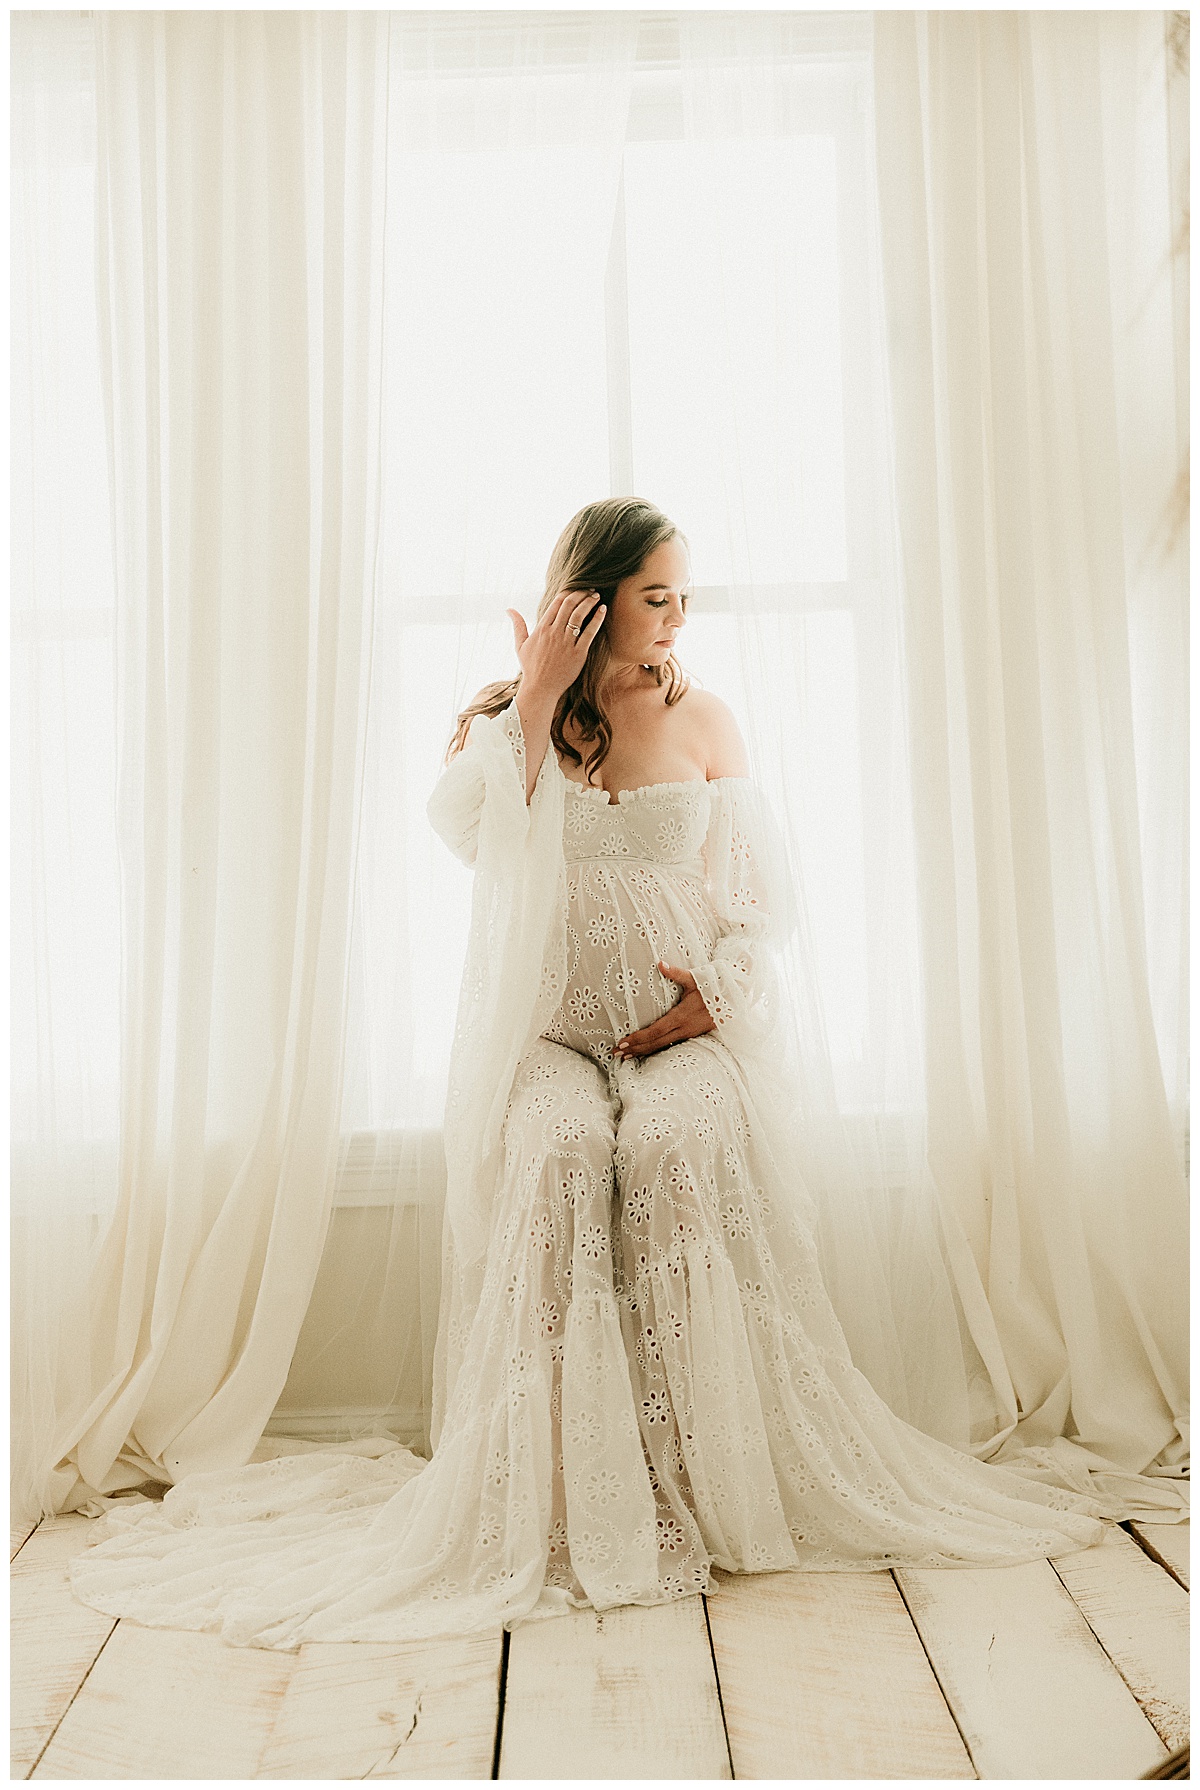 Adult holds pregnant belly while wearing gorgeous white gown for Virginia Maternity Photographer